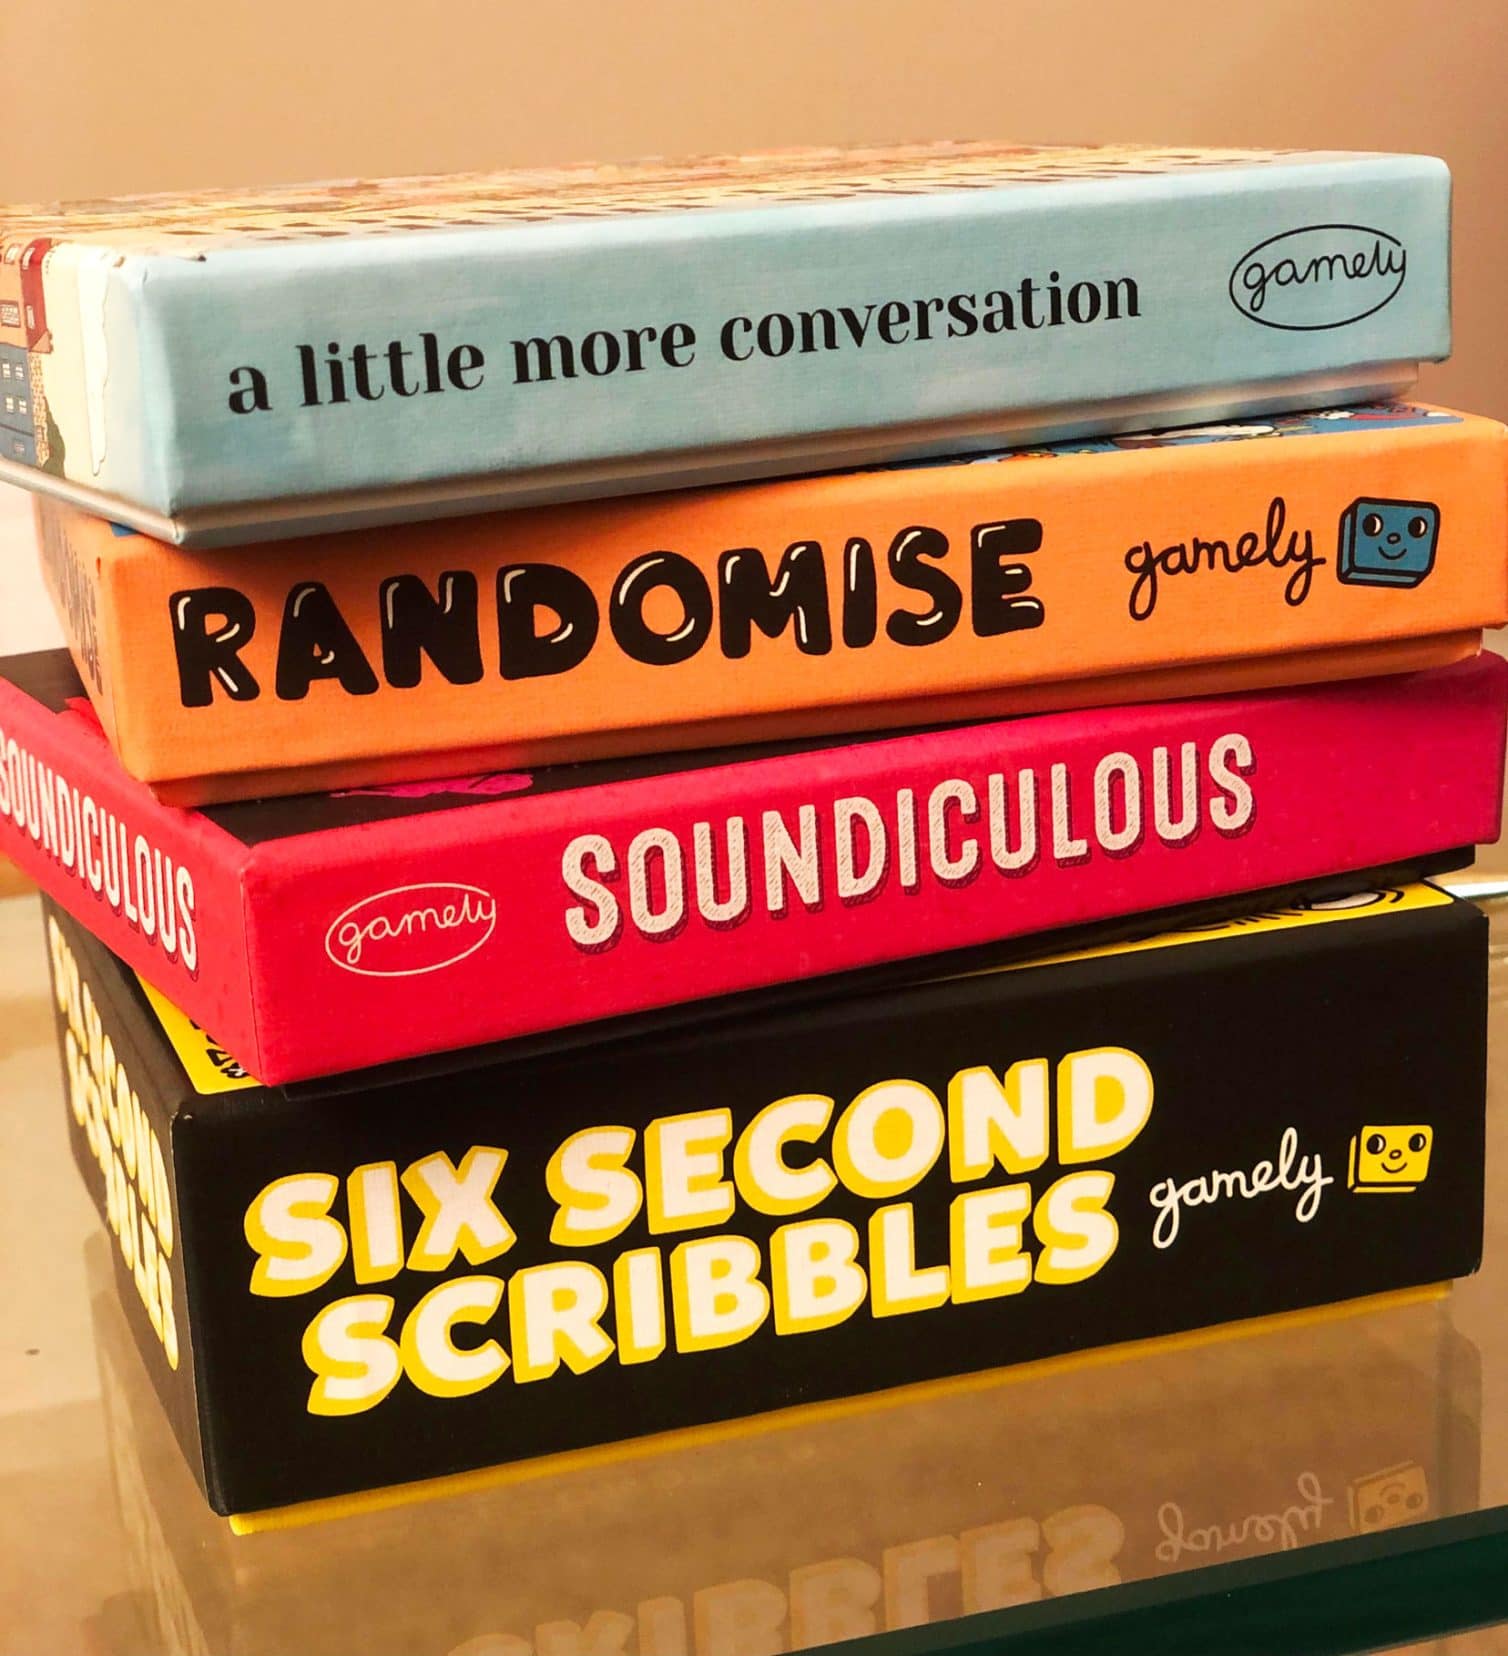 our Stack of Gamely games including Randomise, Six Second Scribbles, Soundiculous and A little more conversation